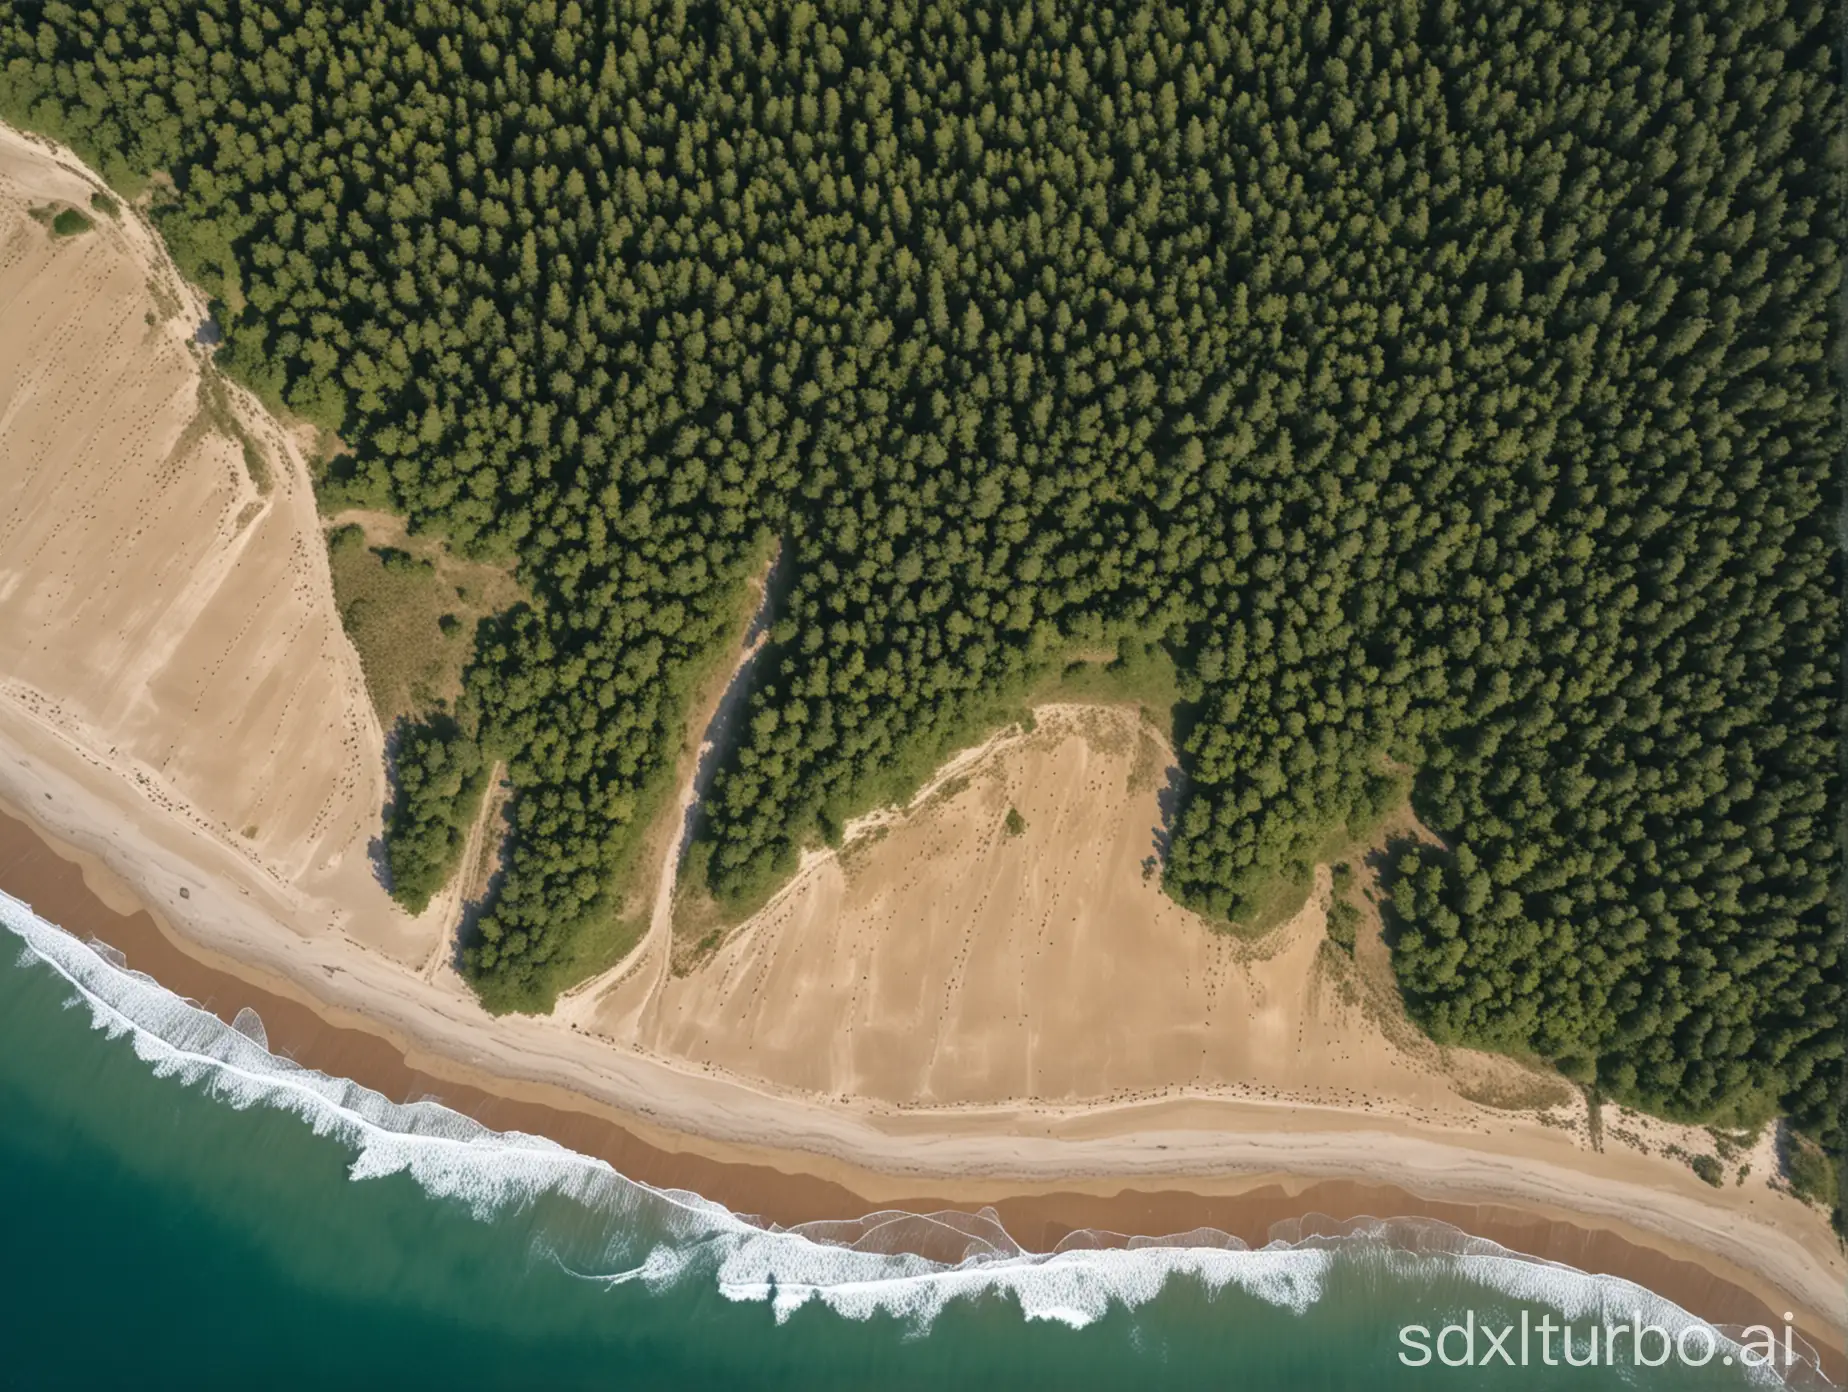 Aerial map of a forested valley with a straight sea at the fringe of the map on one side. The sea takes a fourth of the canvas stretching from edge to edge at the bottom of the image. The shoreline between the sea and the forest is straight. The shore is wide and sandy